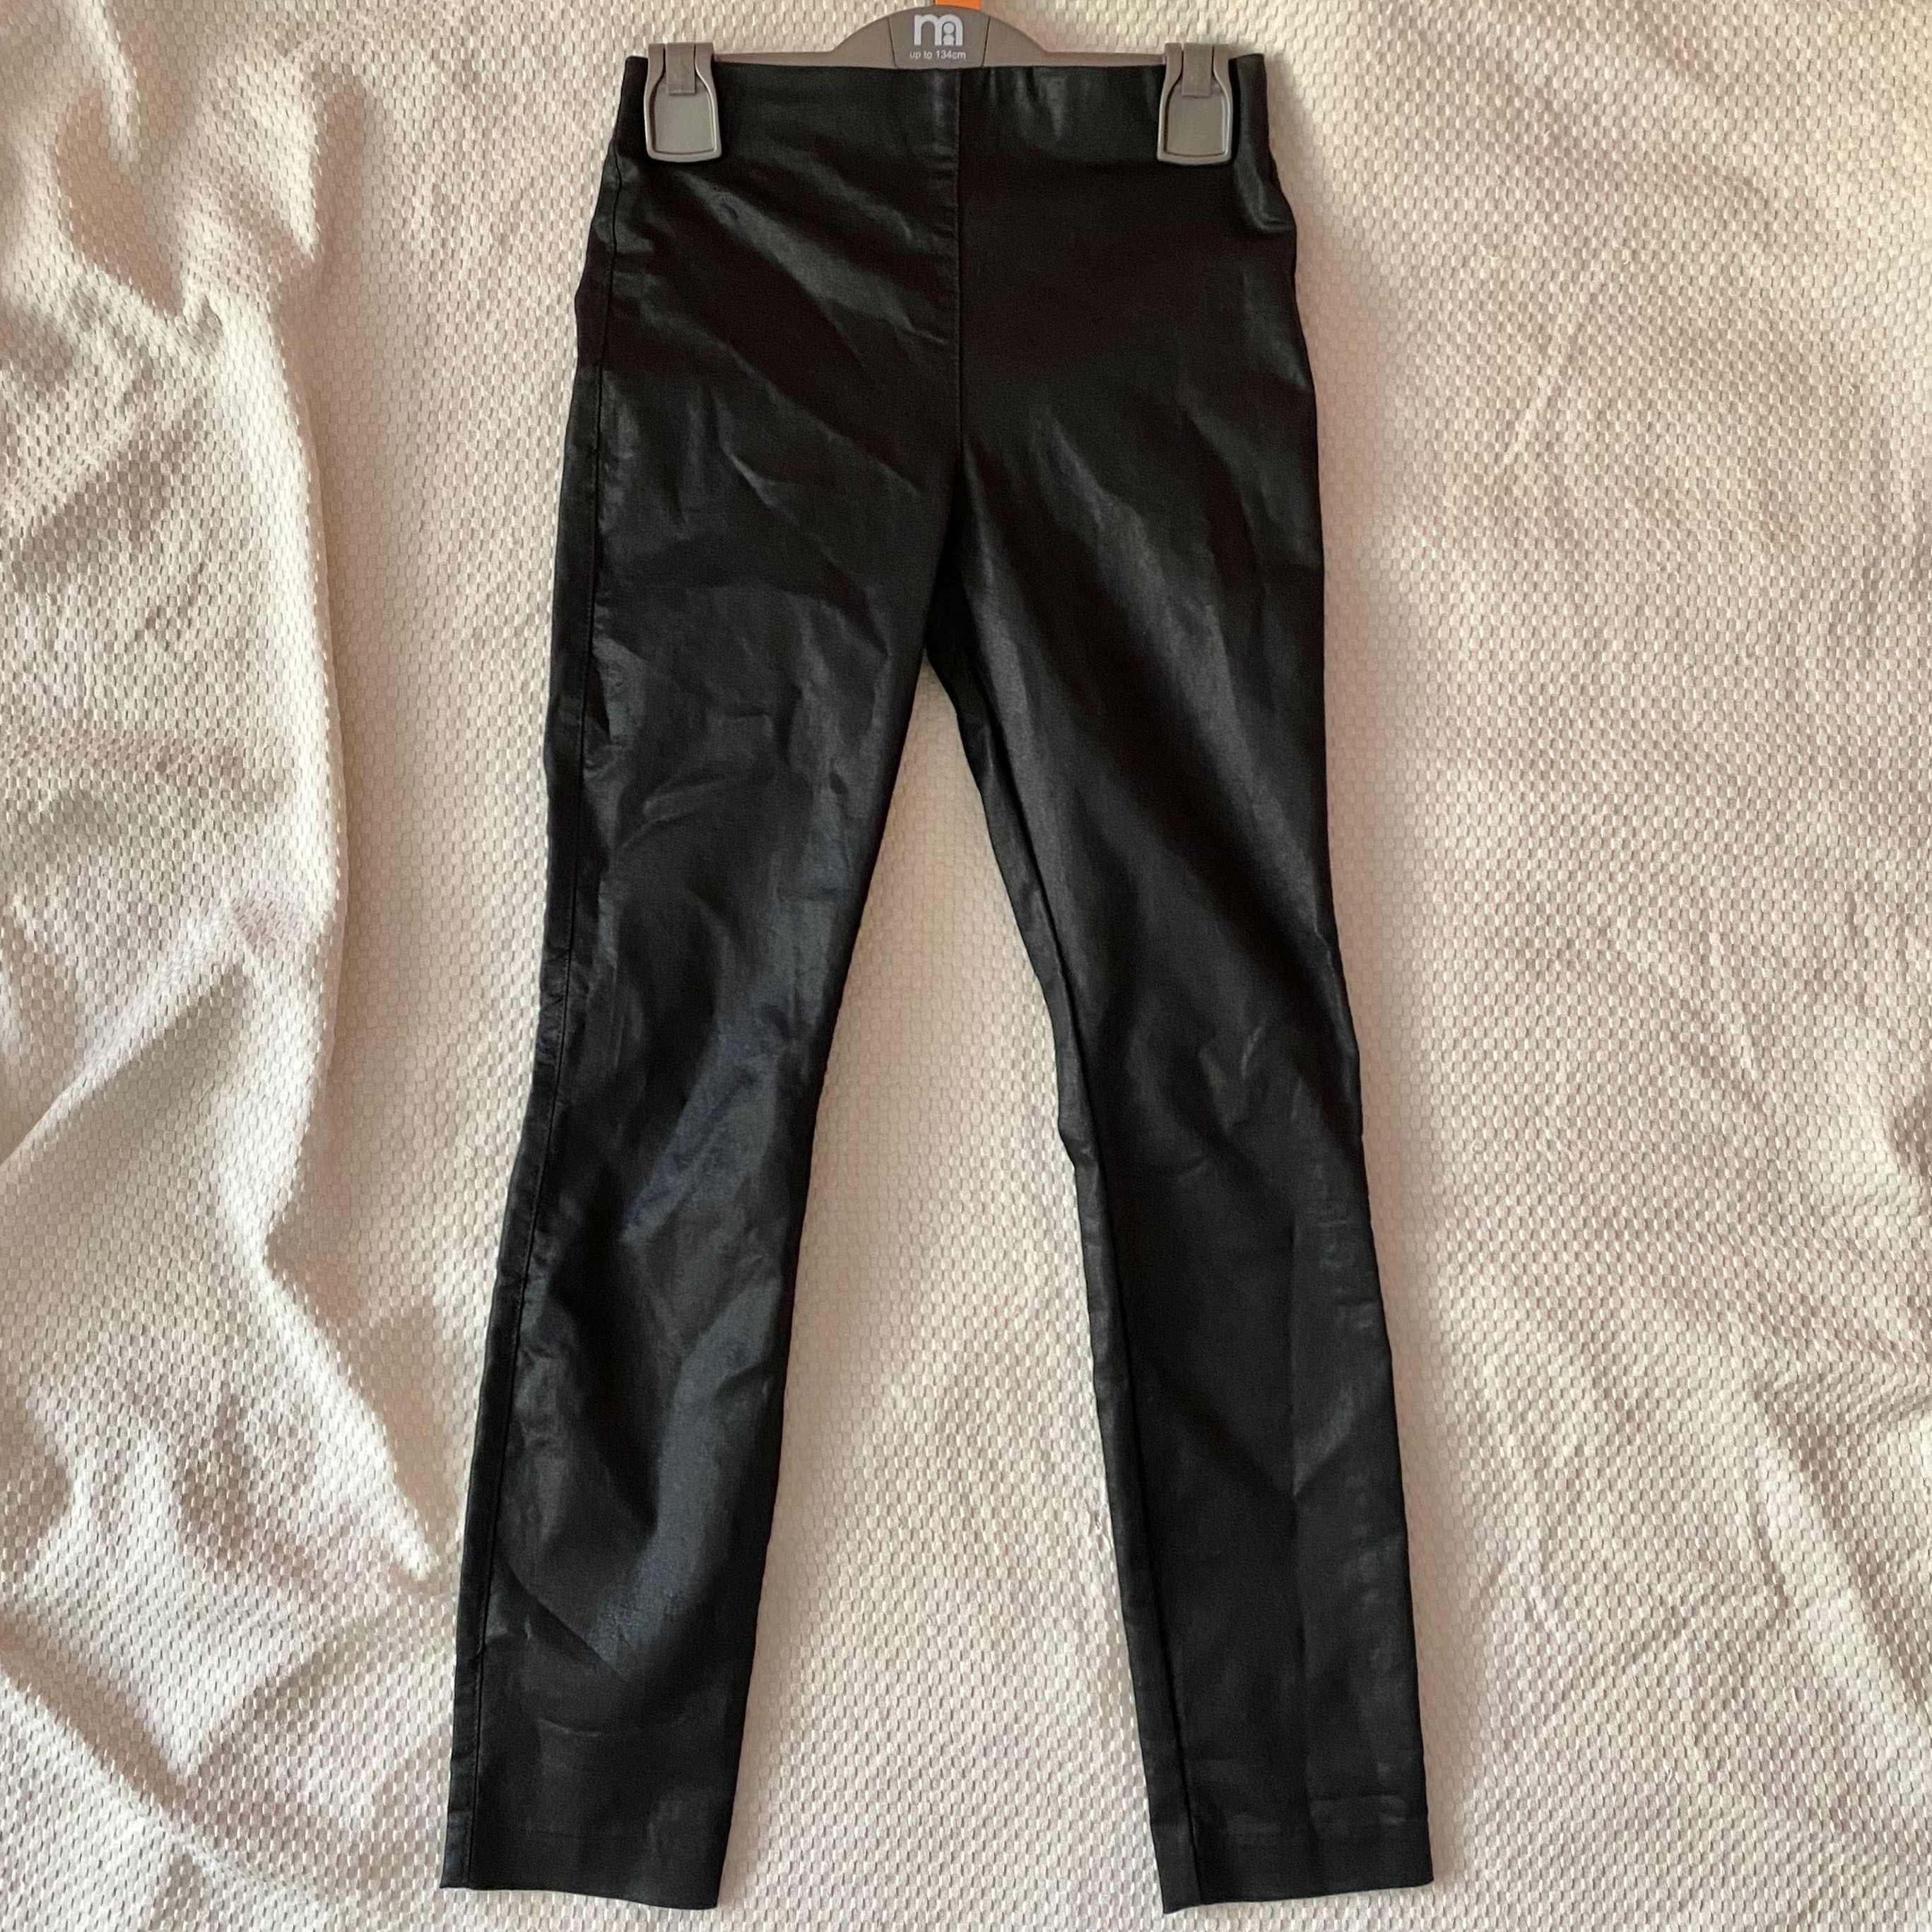 H&M Black Leather Pants, Women's Fashion, Bottoms, Jeans on Carousell